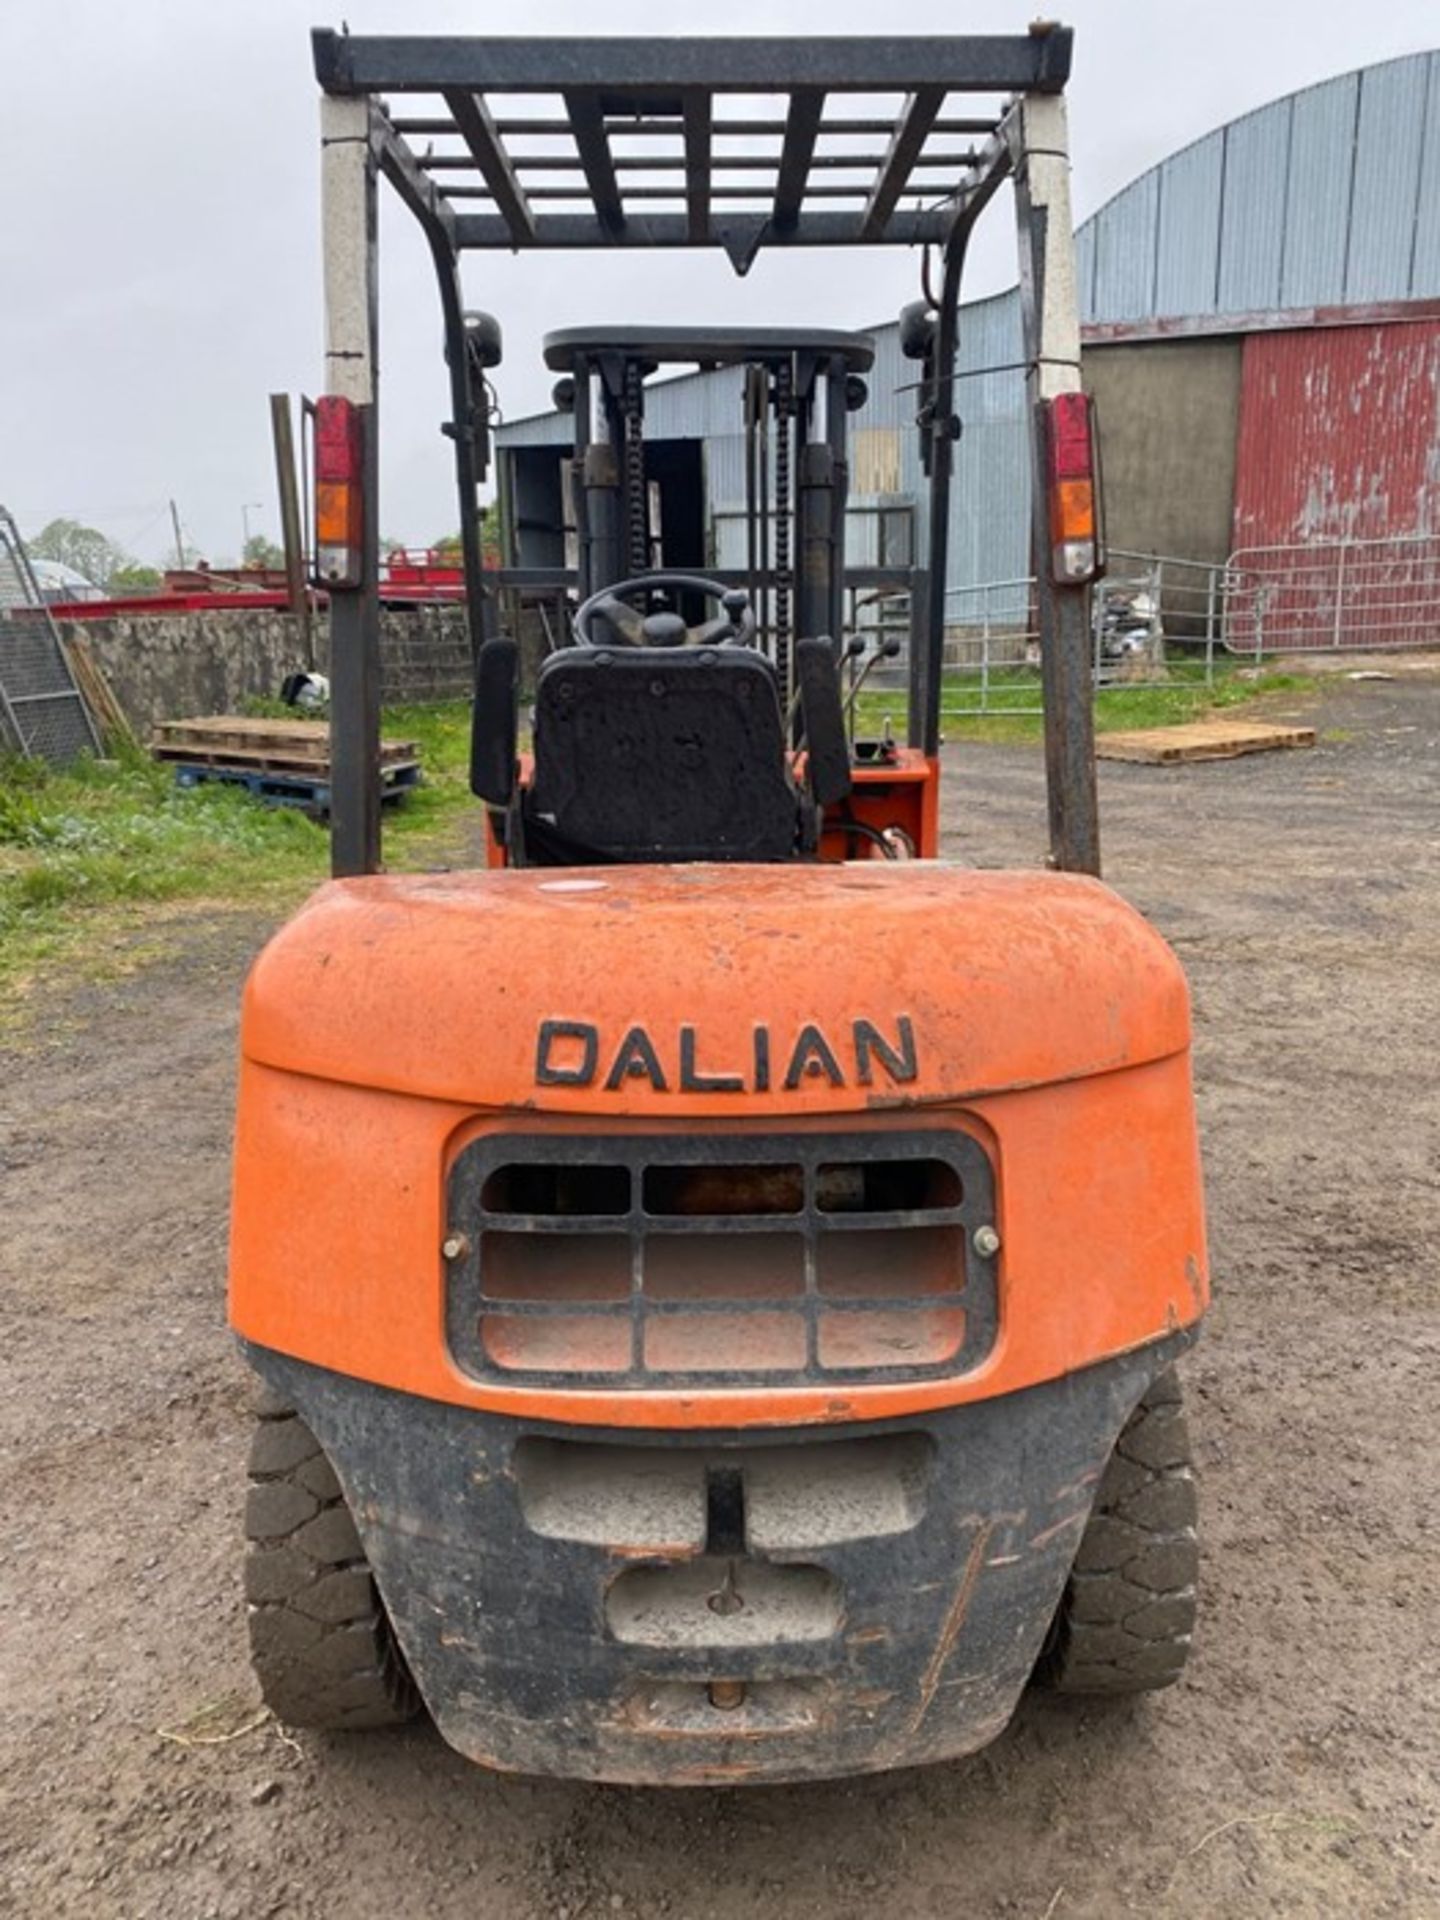 DALIAN 3TONNE FORKLIFT 904 HOURS C/W NEW SOLID BACK WHEELS (RUNNING WELL) - Image 8 of 9